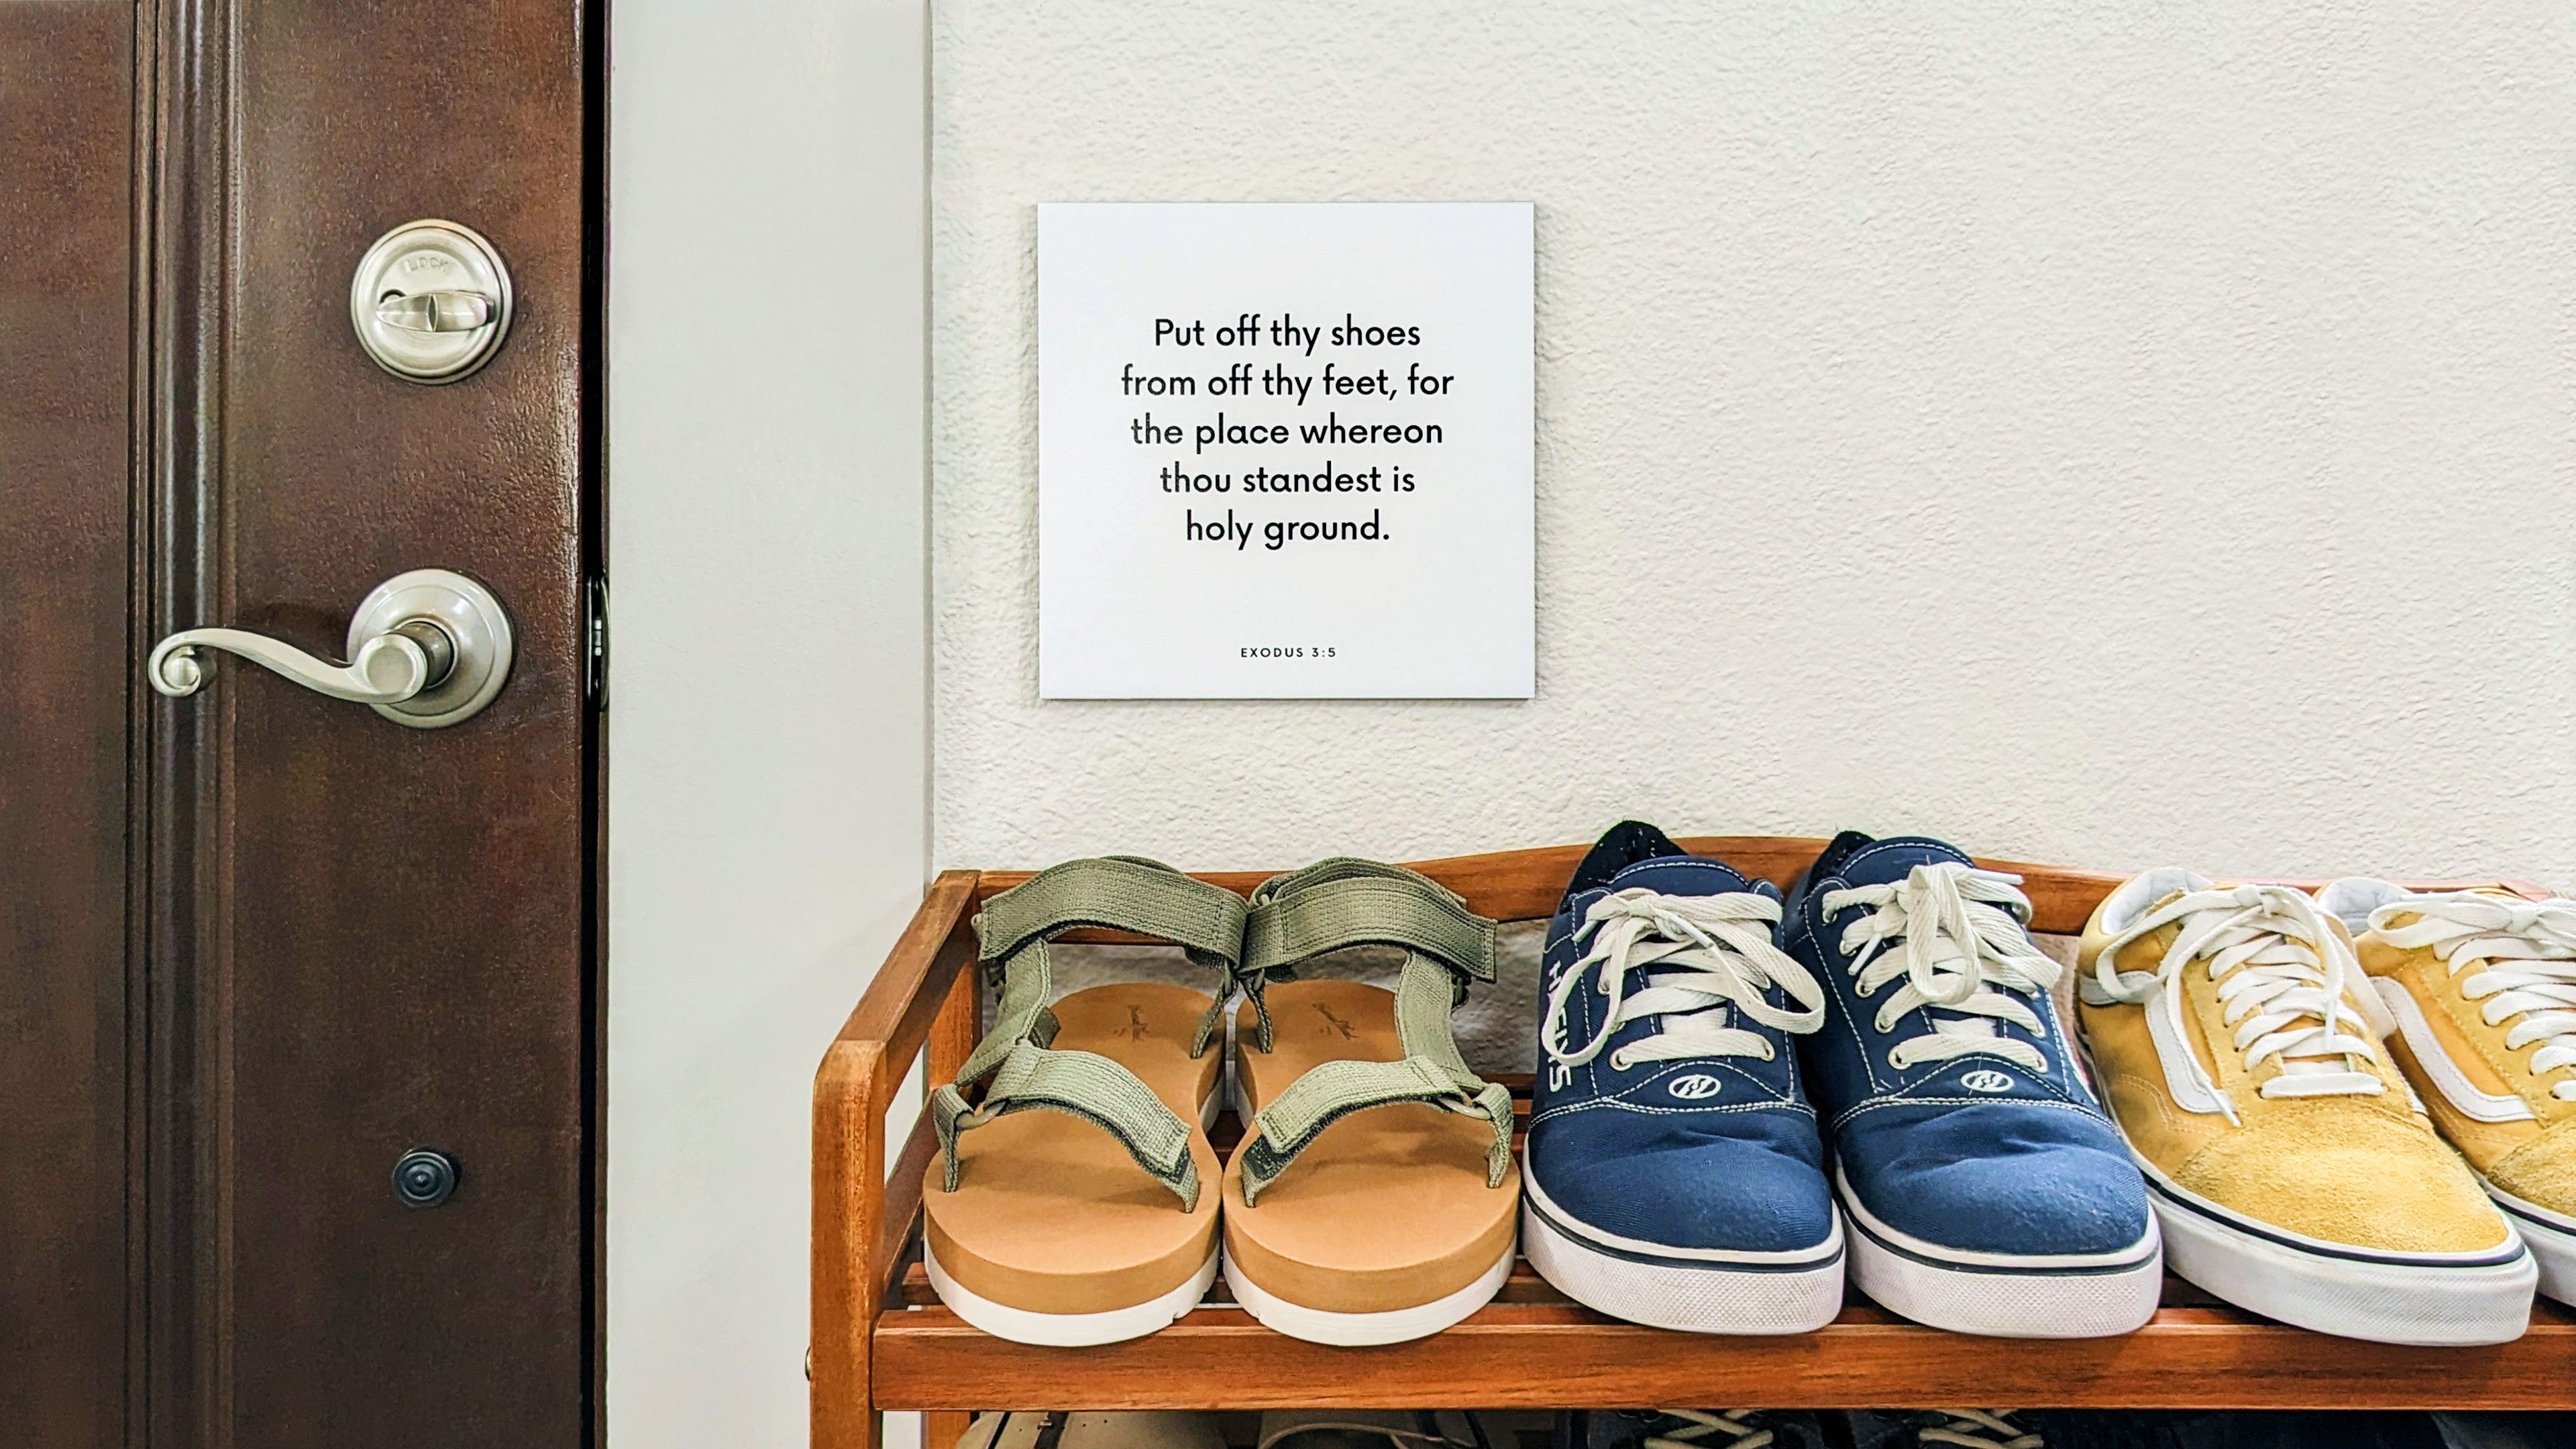 Shoe rack with a scripture tile on the wall next to it